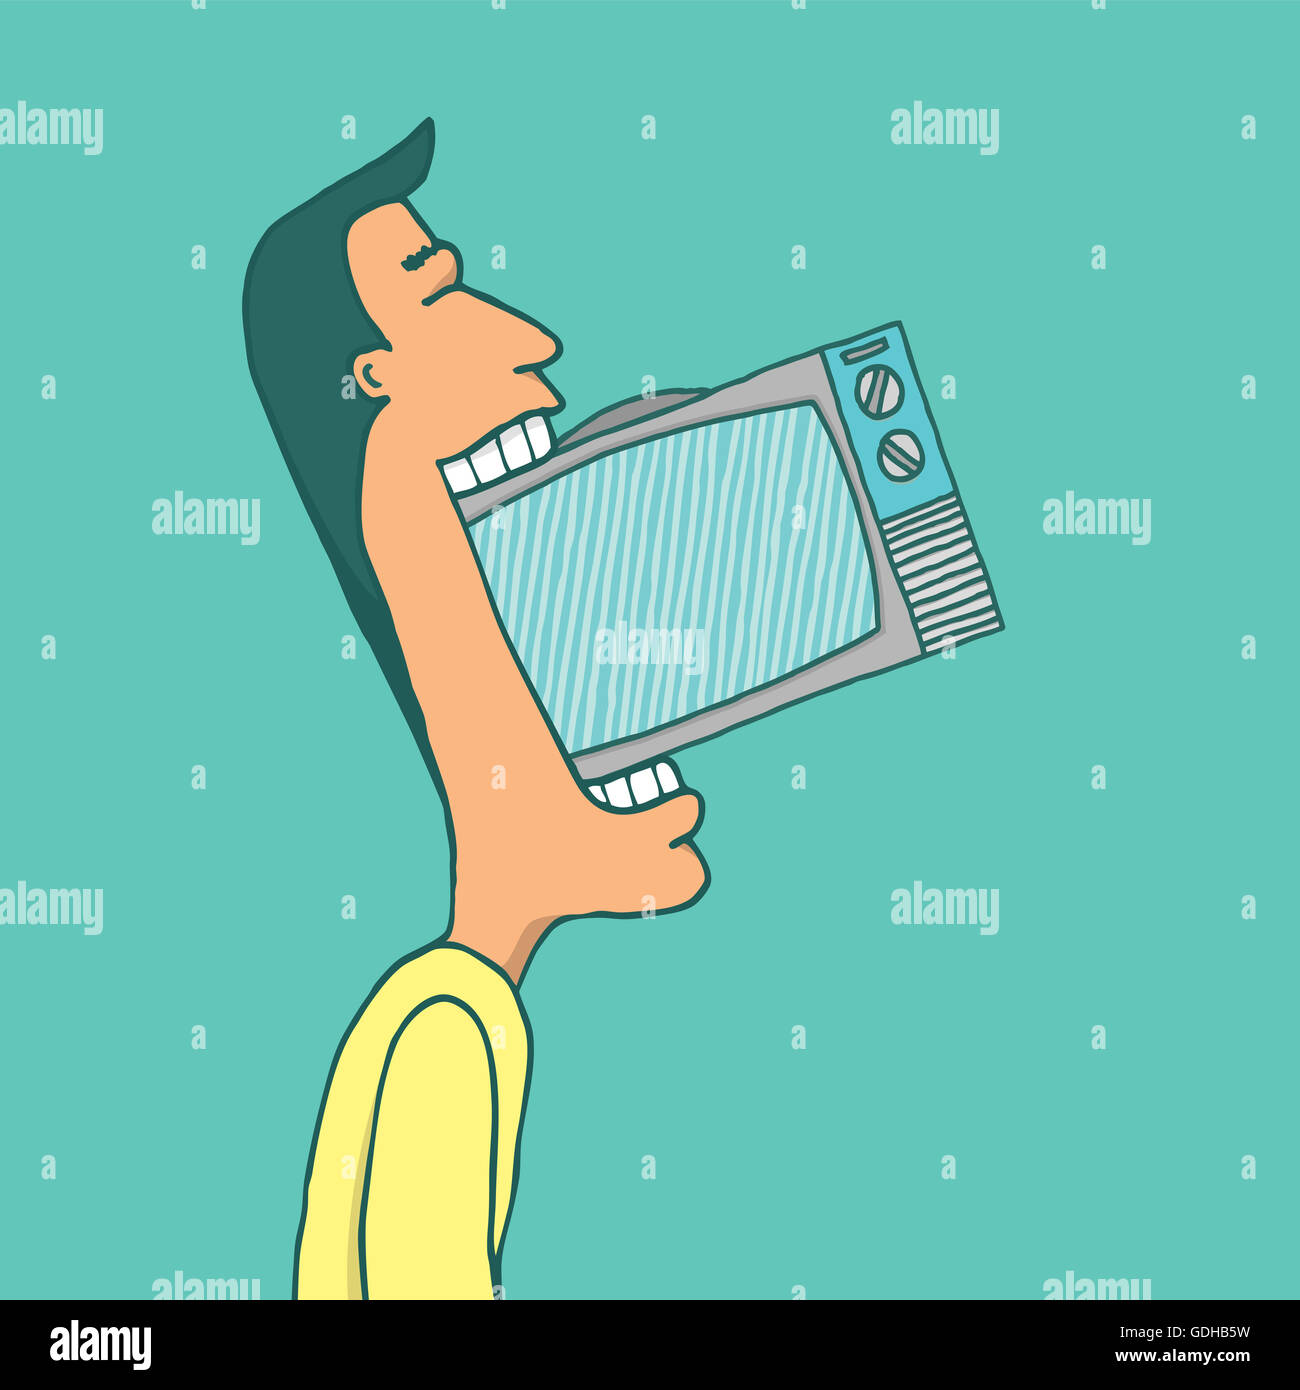 Cartoon illustration of an enthusiastic television addict eating a tv set Stock Photo